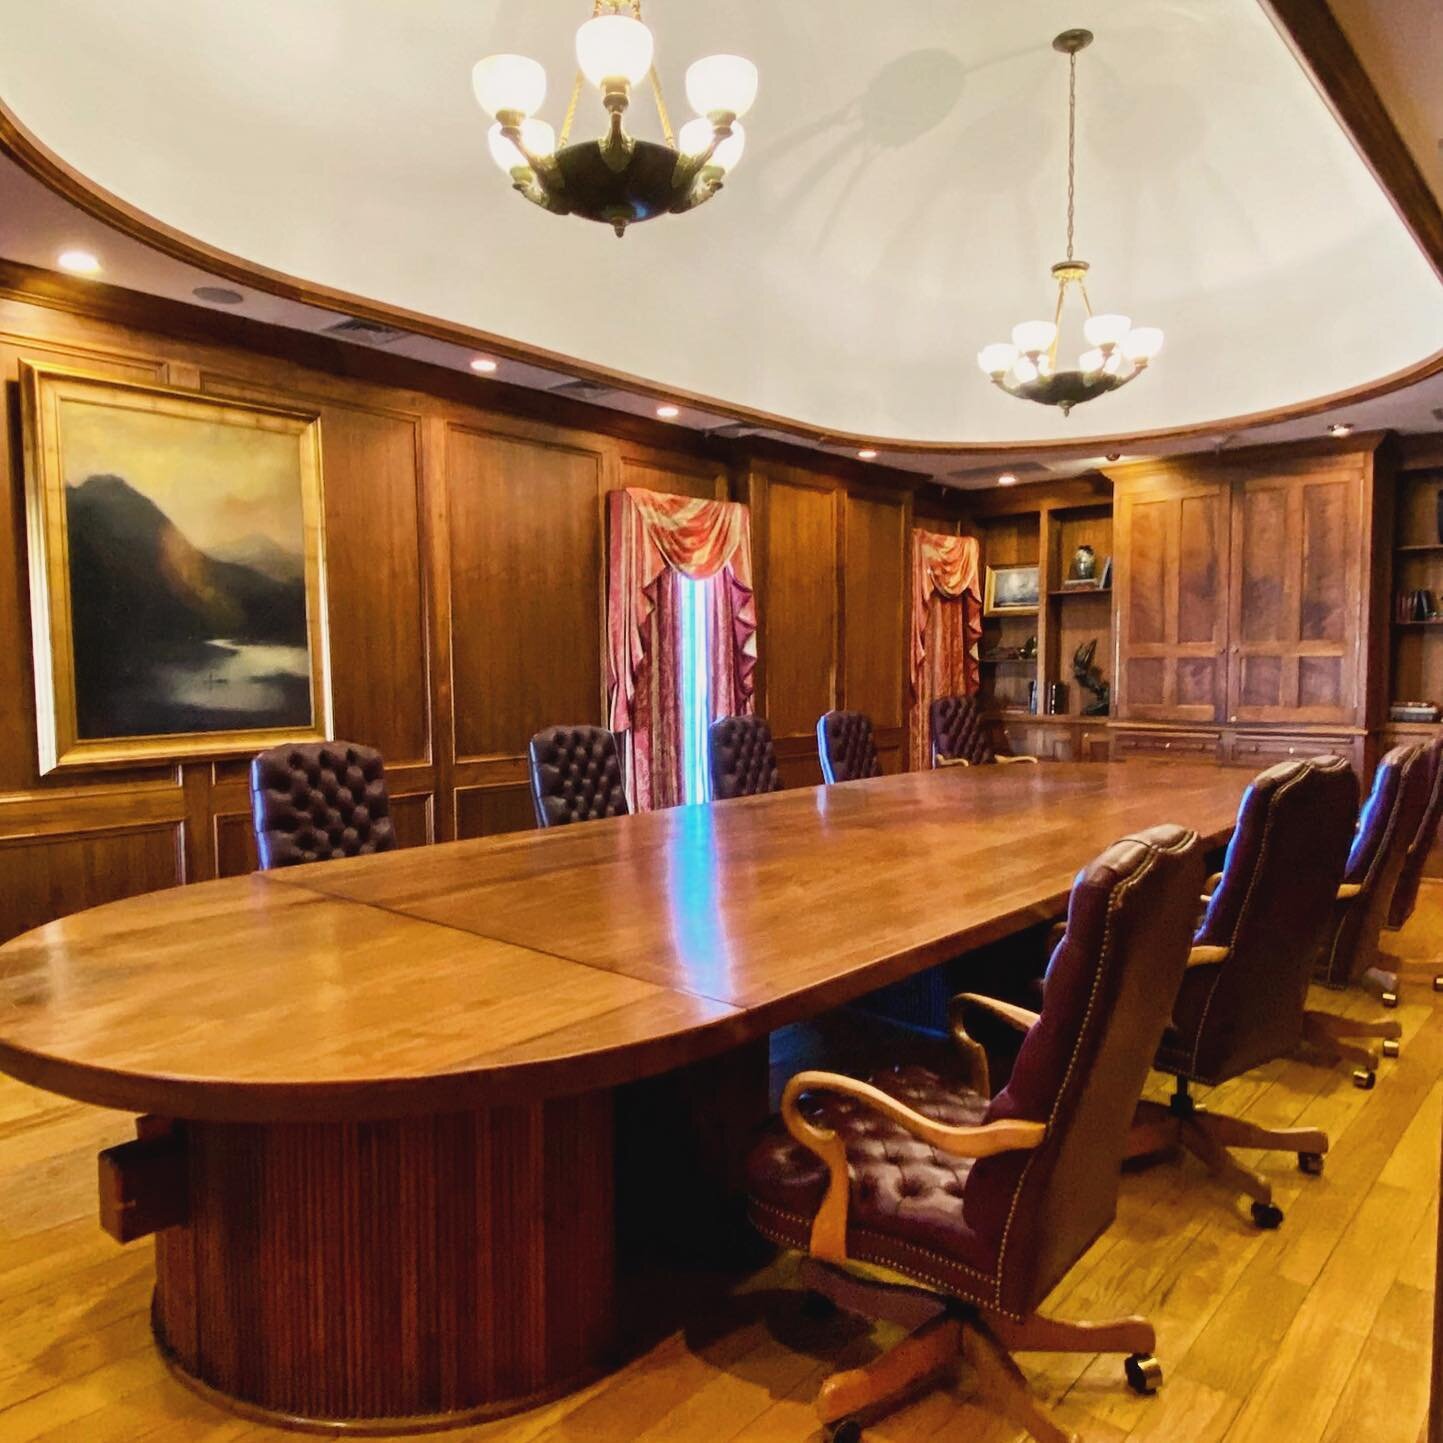 Take a peek inside the Island Room&hellip;

We can&rsquo;t imagine a more stately meeting space! A breathtaking solid cherry and satinwood conference table sits under a domed ceiling, evoking a strong and courtly ambience. Incredible mahogany panelin